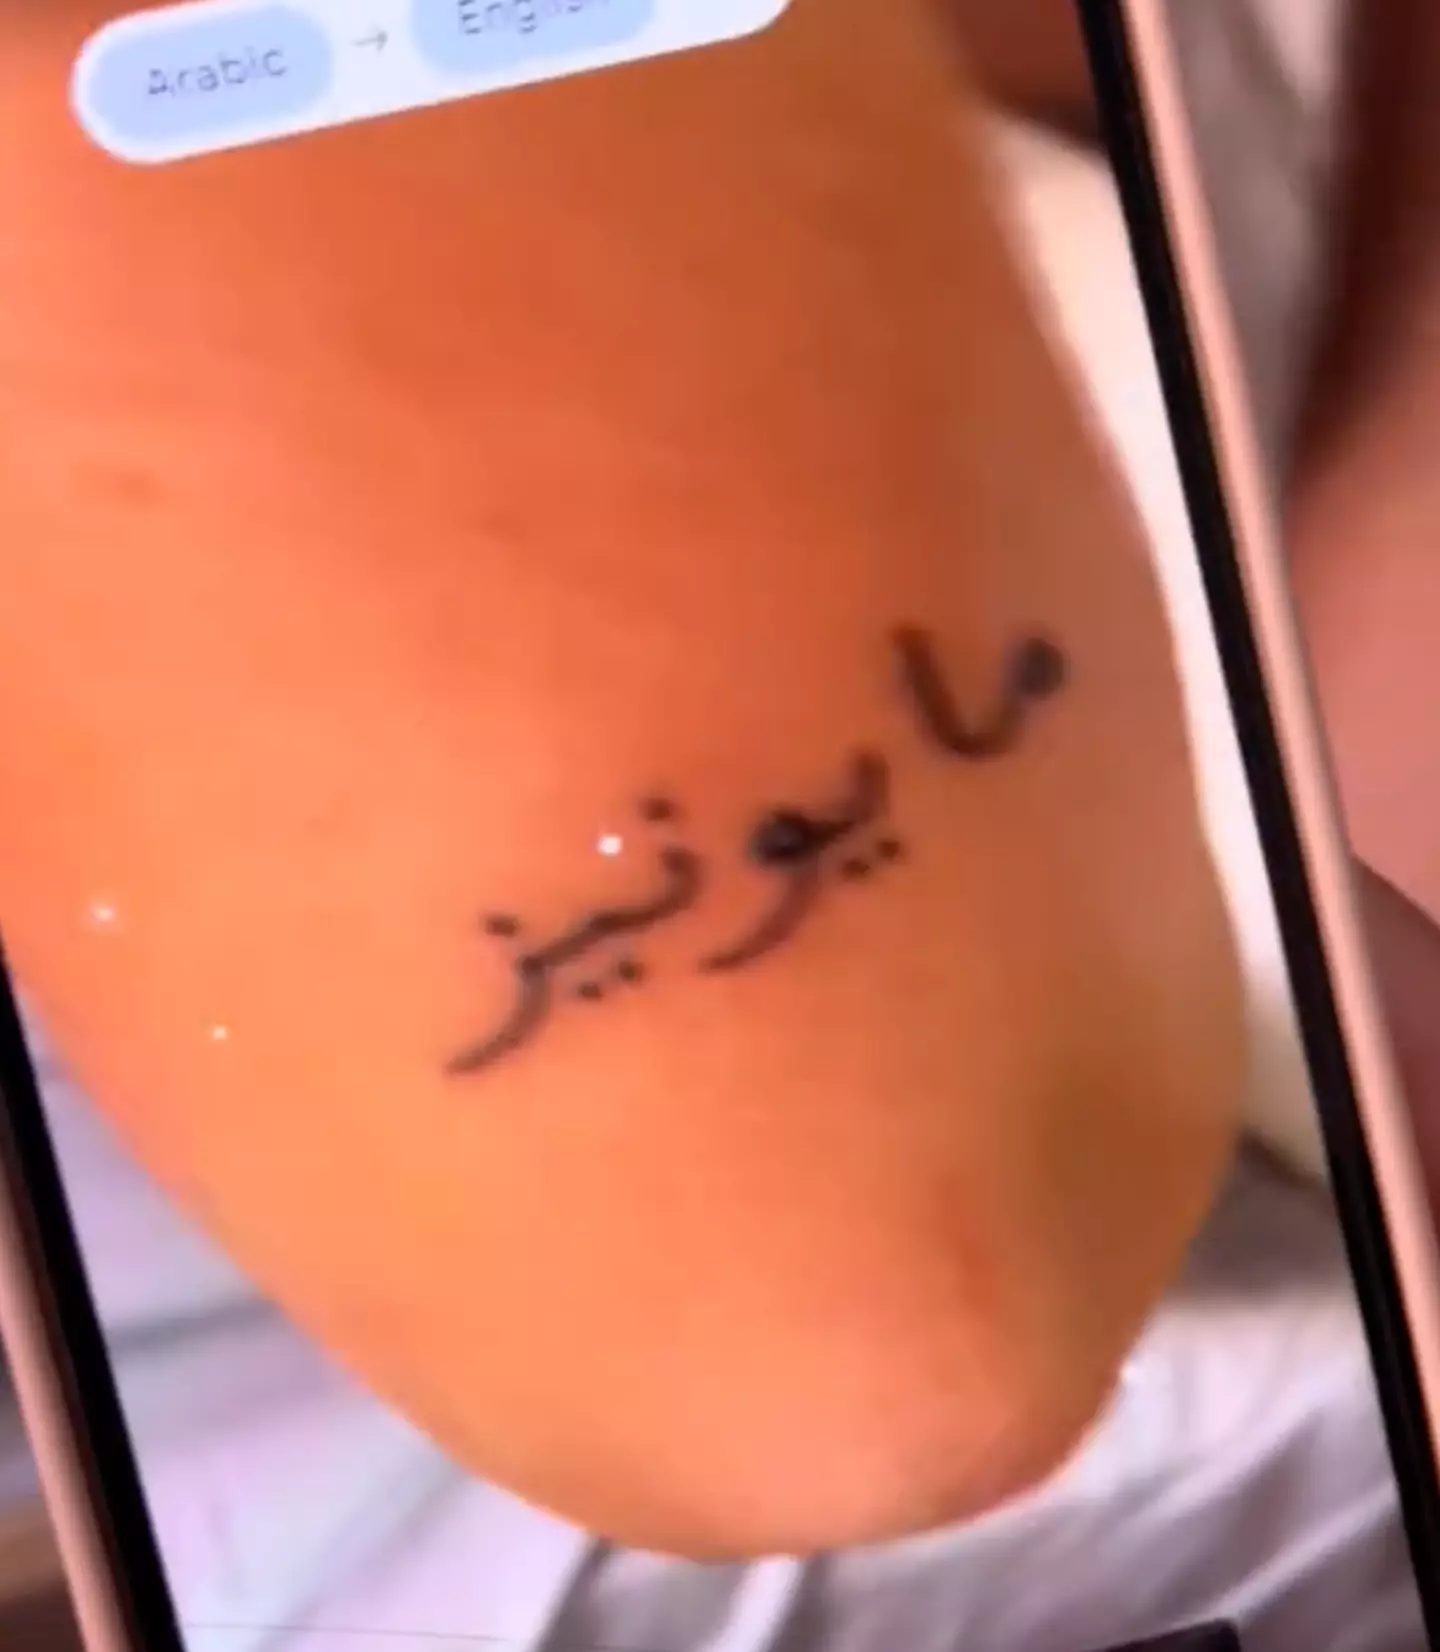 A tourist who went to Morrocco, decided to say screw sensibility and now has a tattoo which has seen her mocked.